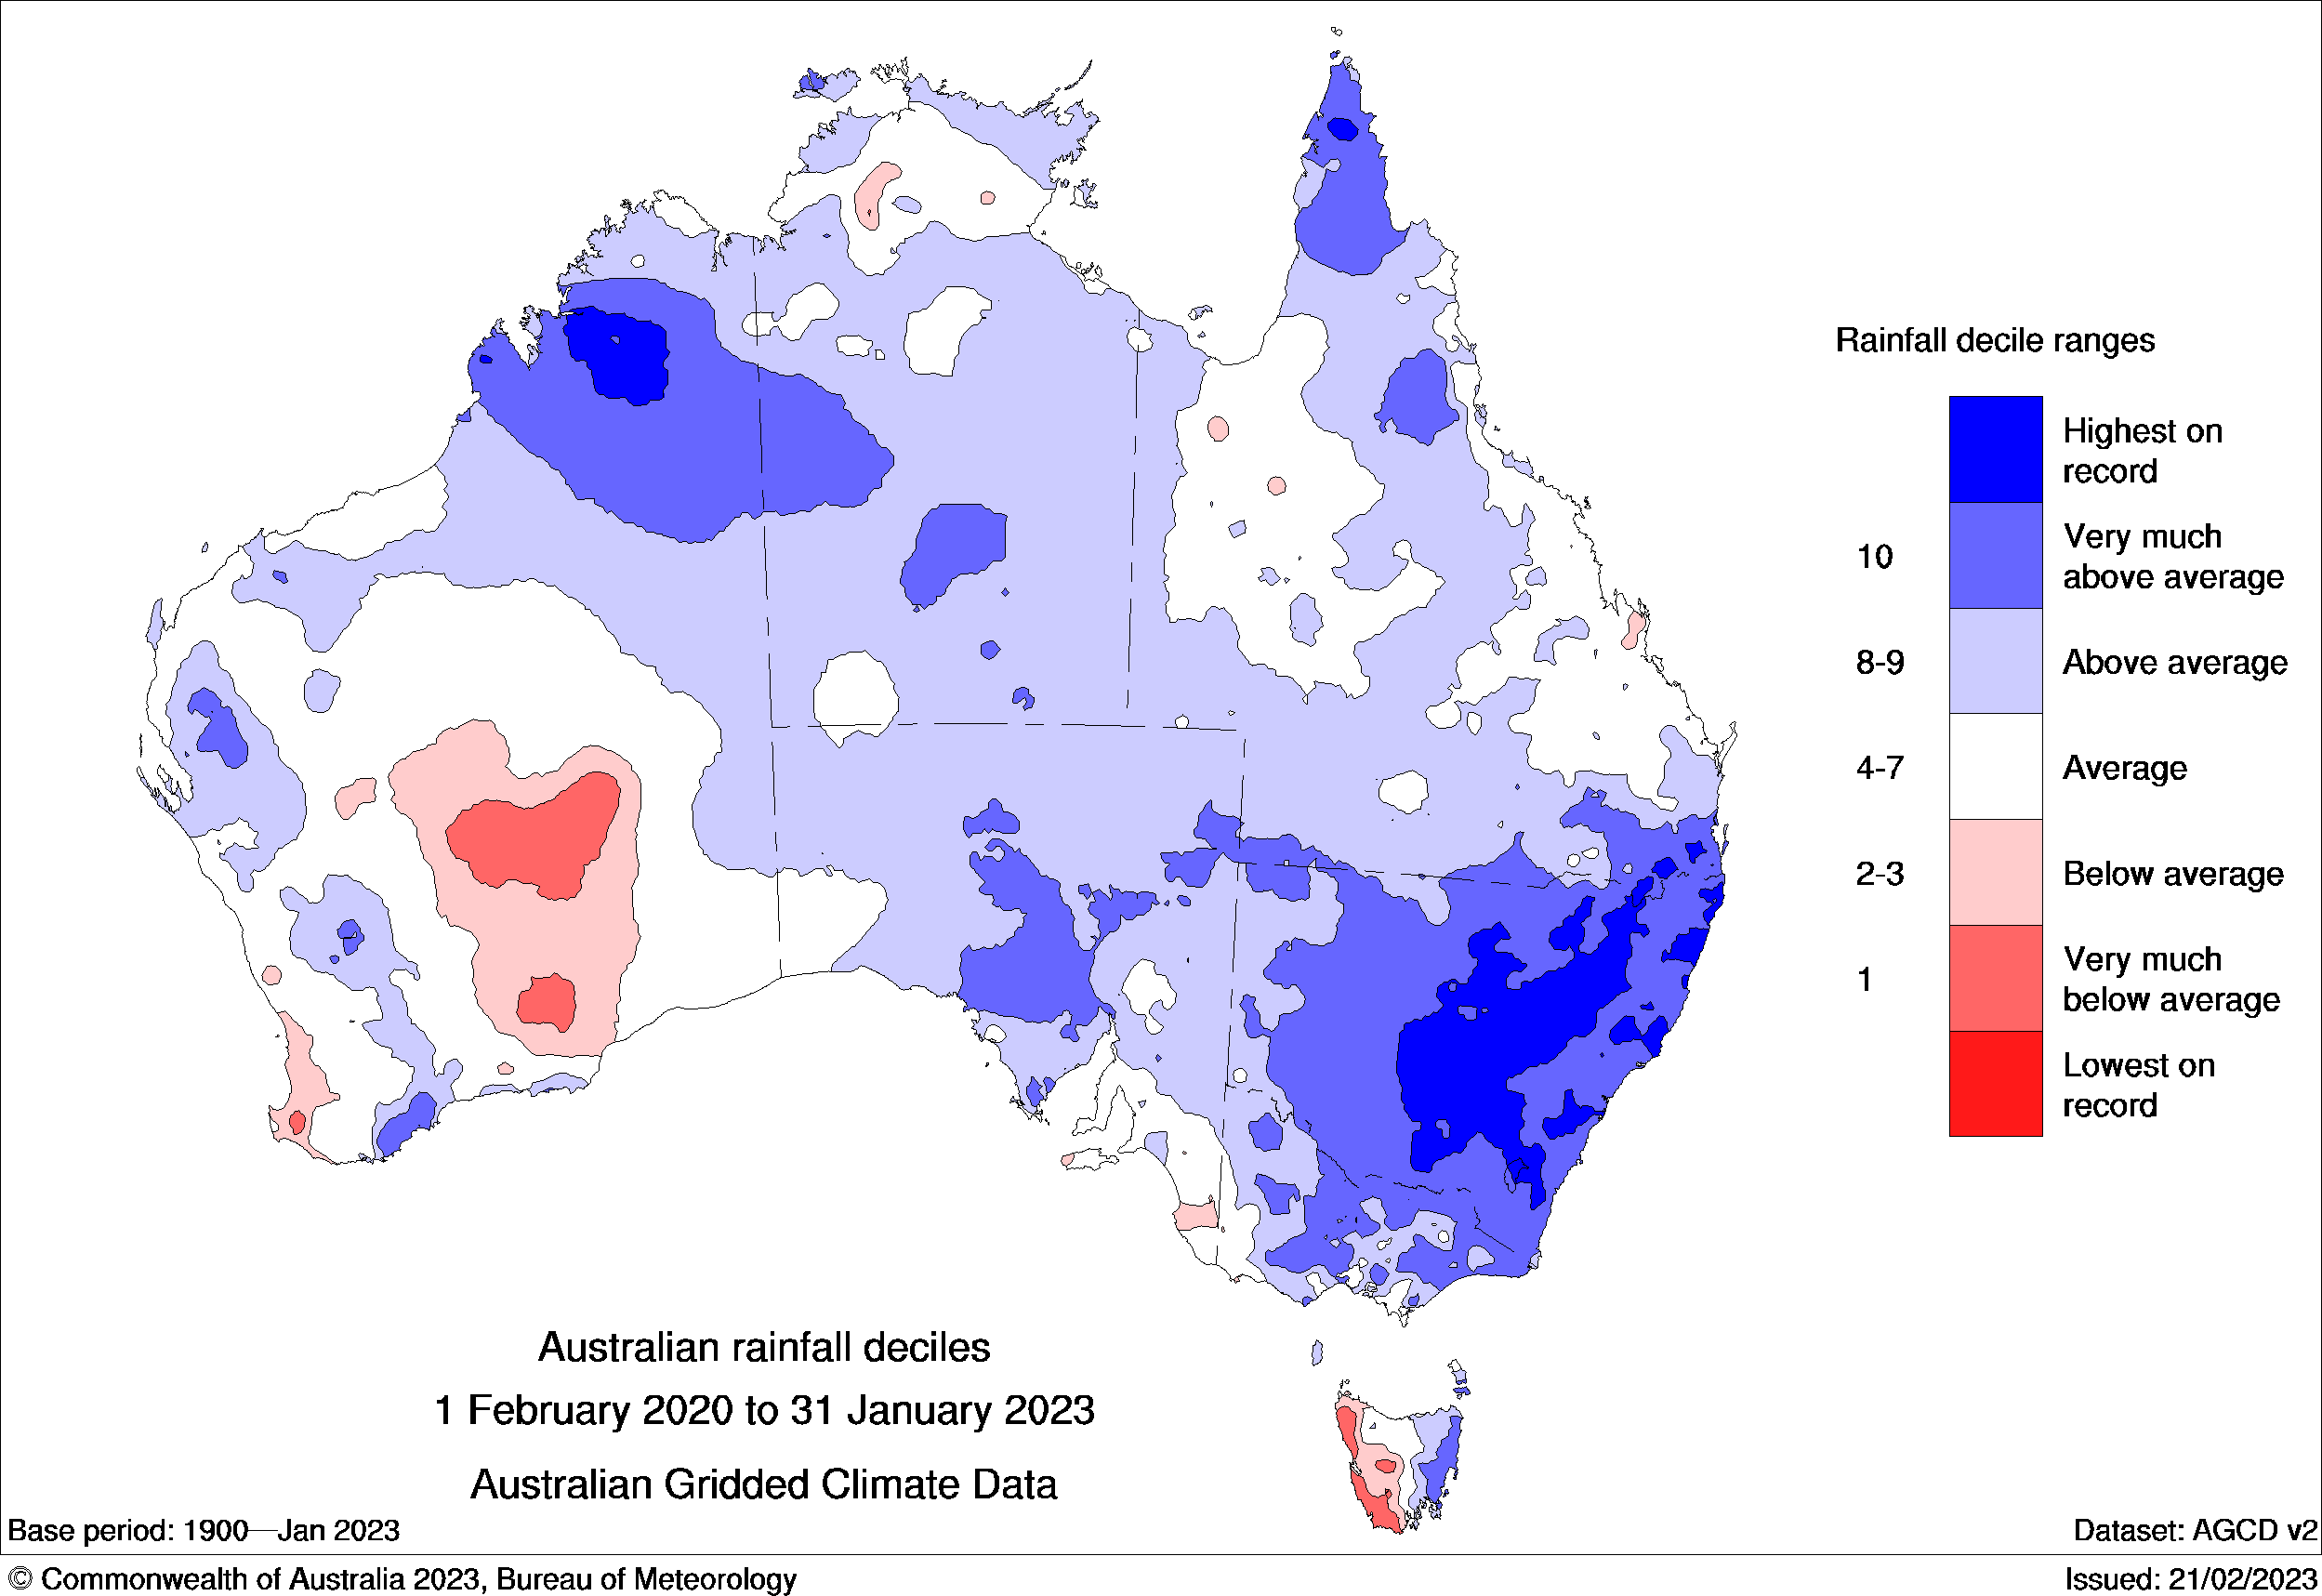 A map of Australia with different colours showing the patches where most rain fell